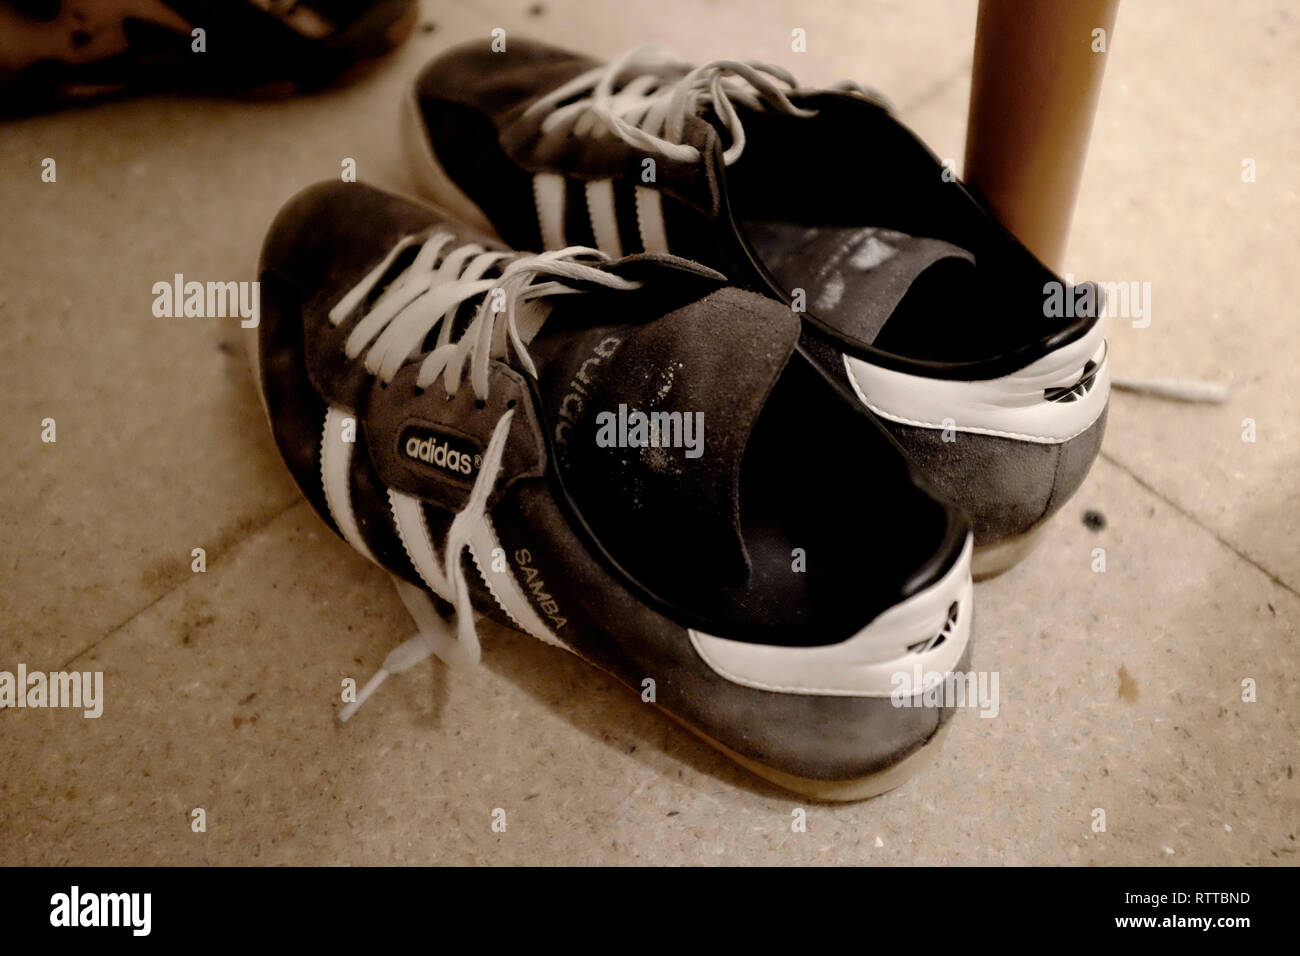 Adidas,trainers,old, worn, blue,suede, on,floor, shoes, sports, football,  running, leisure, lounging,around Stock Photo - Alamy